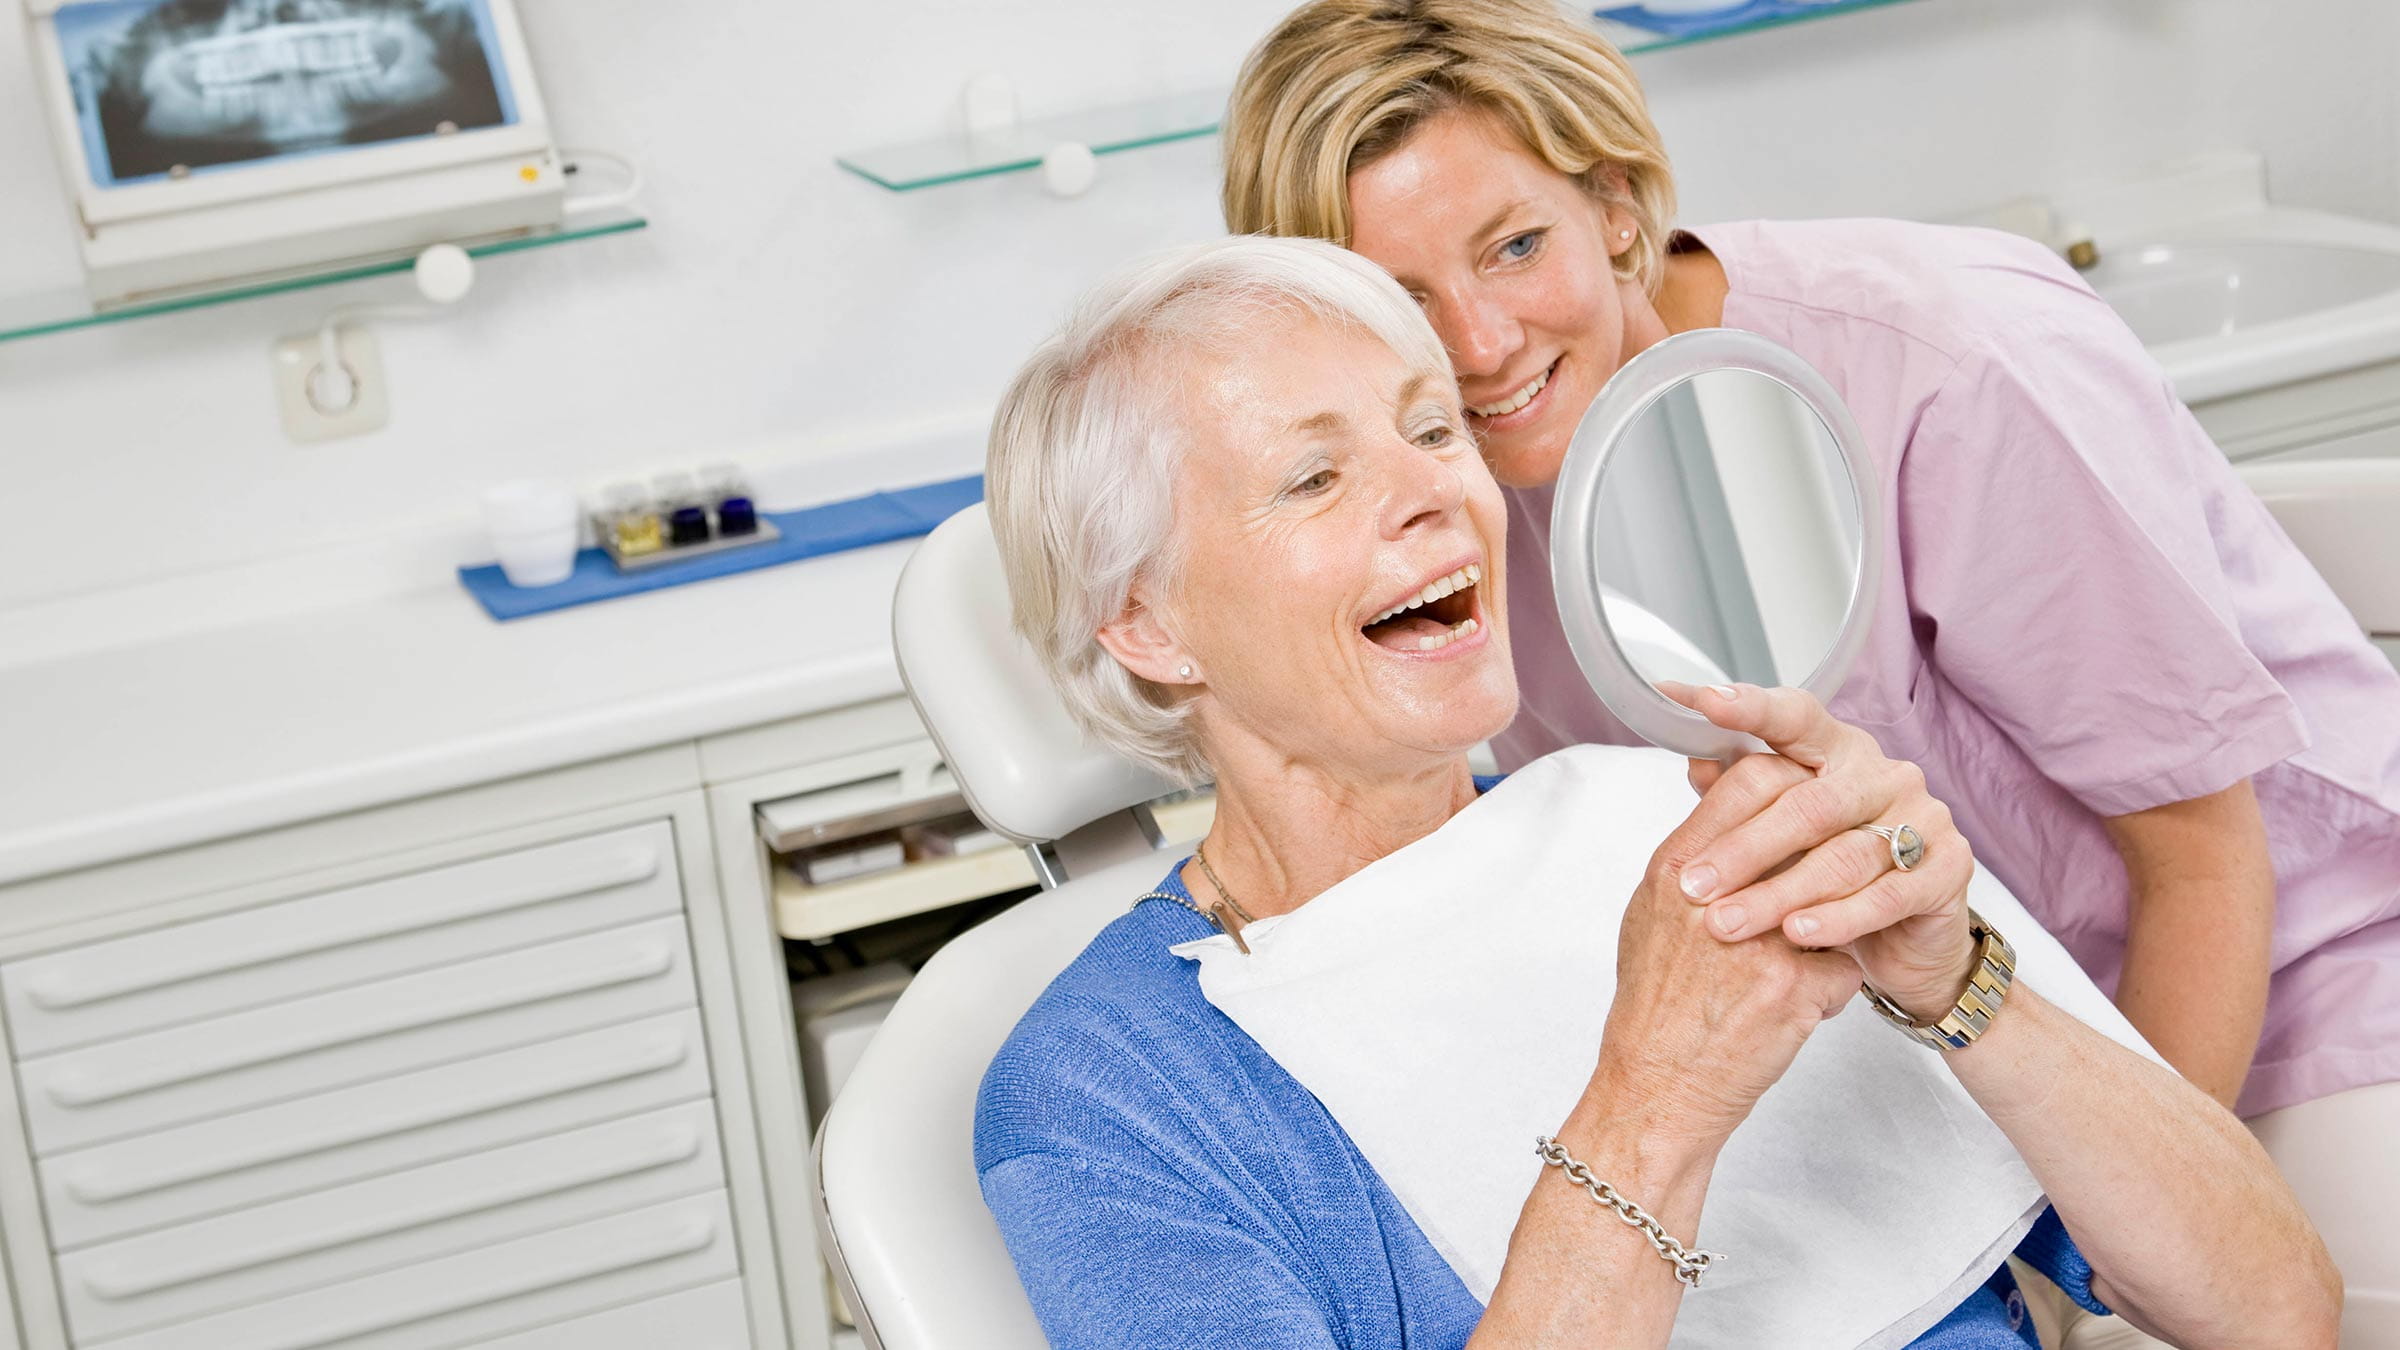 Dental implants vs. dentures: Which are right for you?